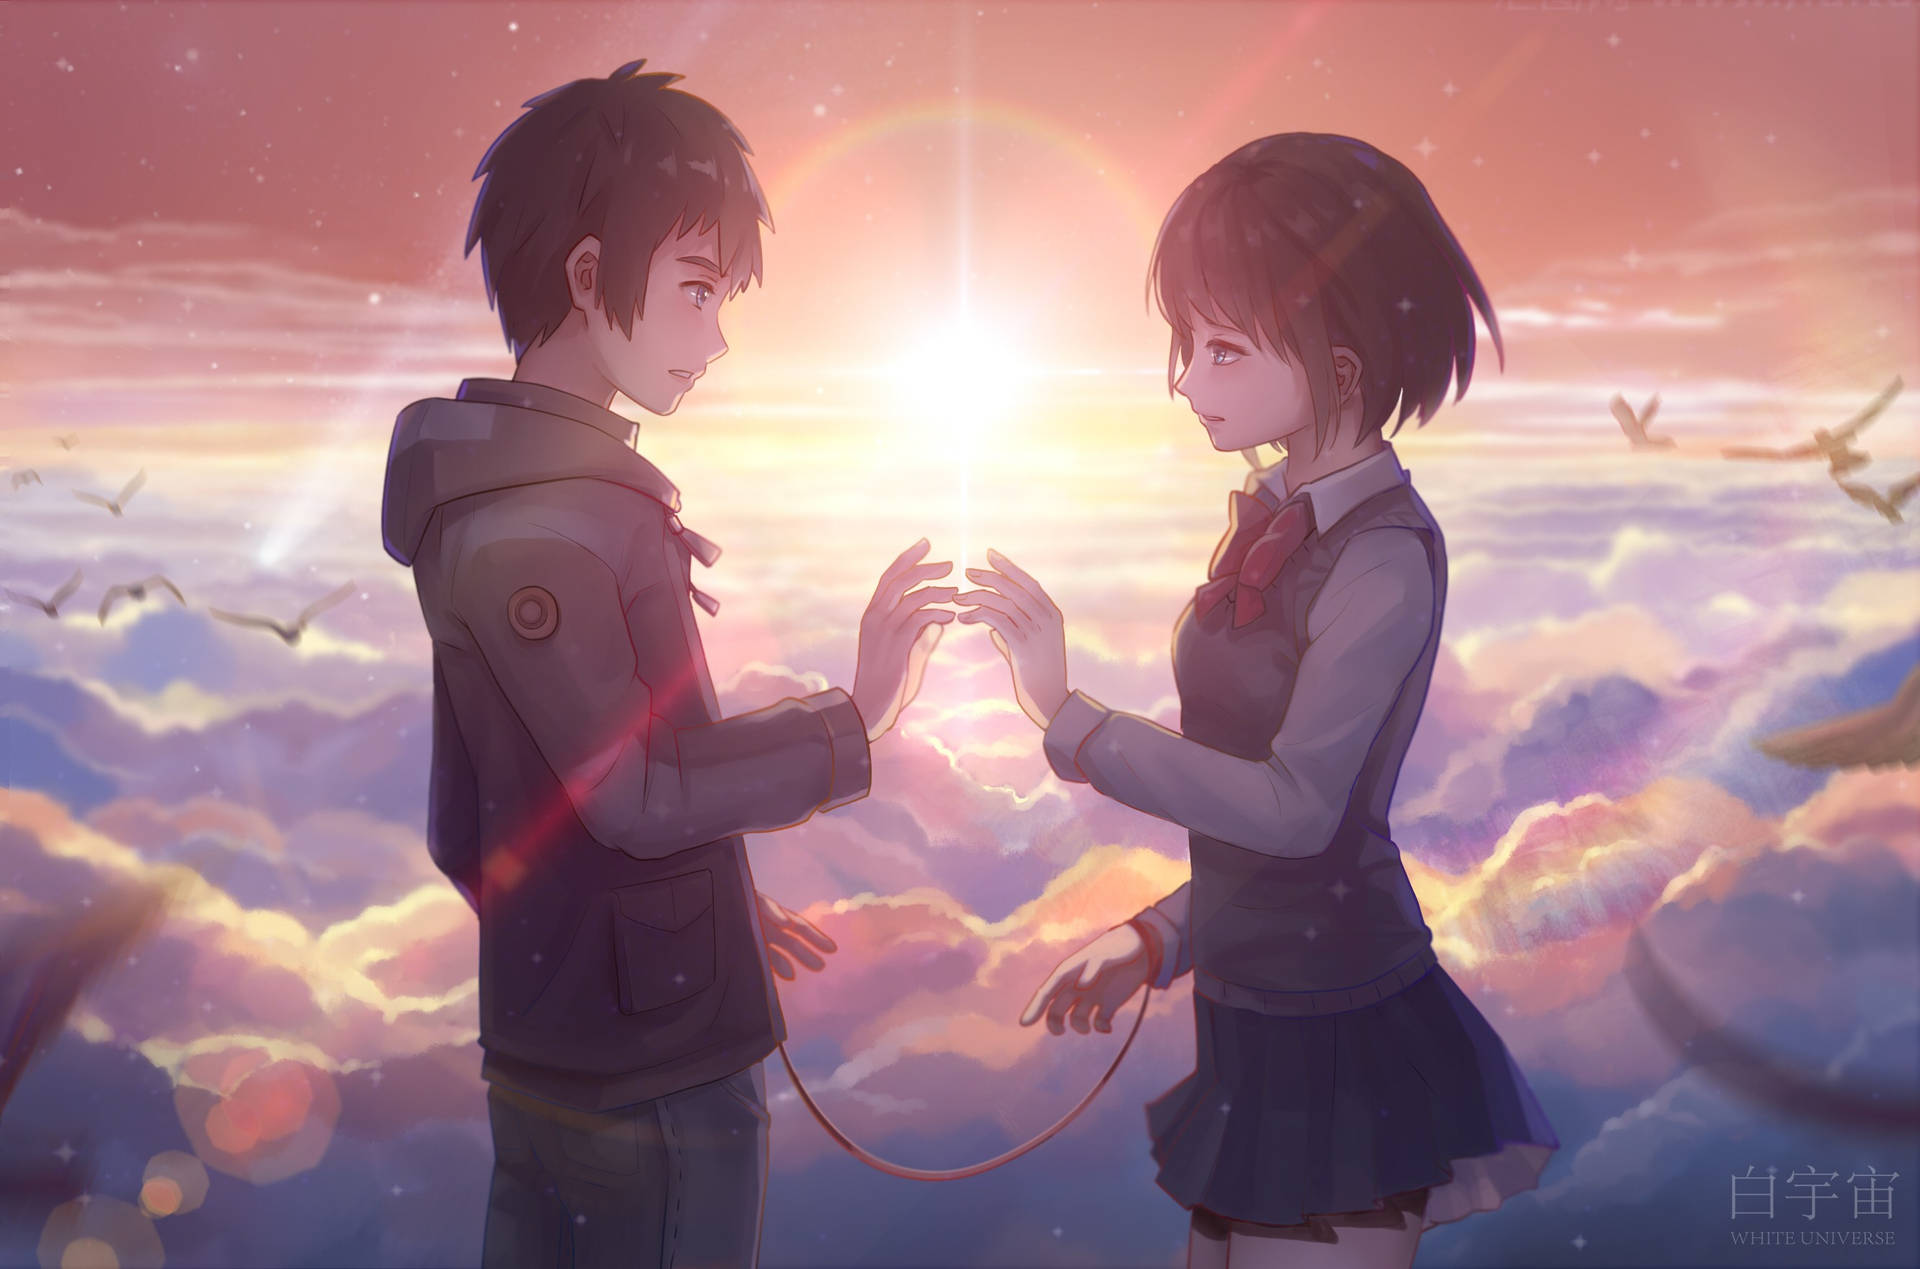 Intertwined Destinies - Your Name Anime 2016